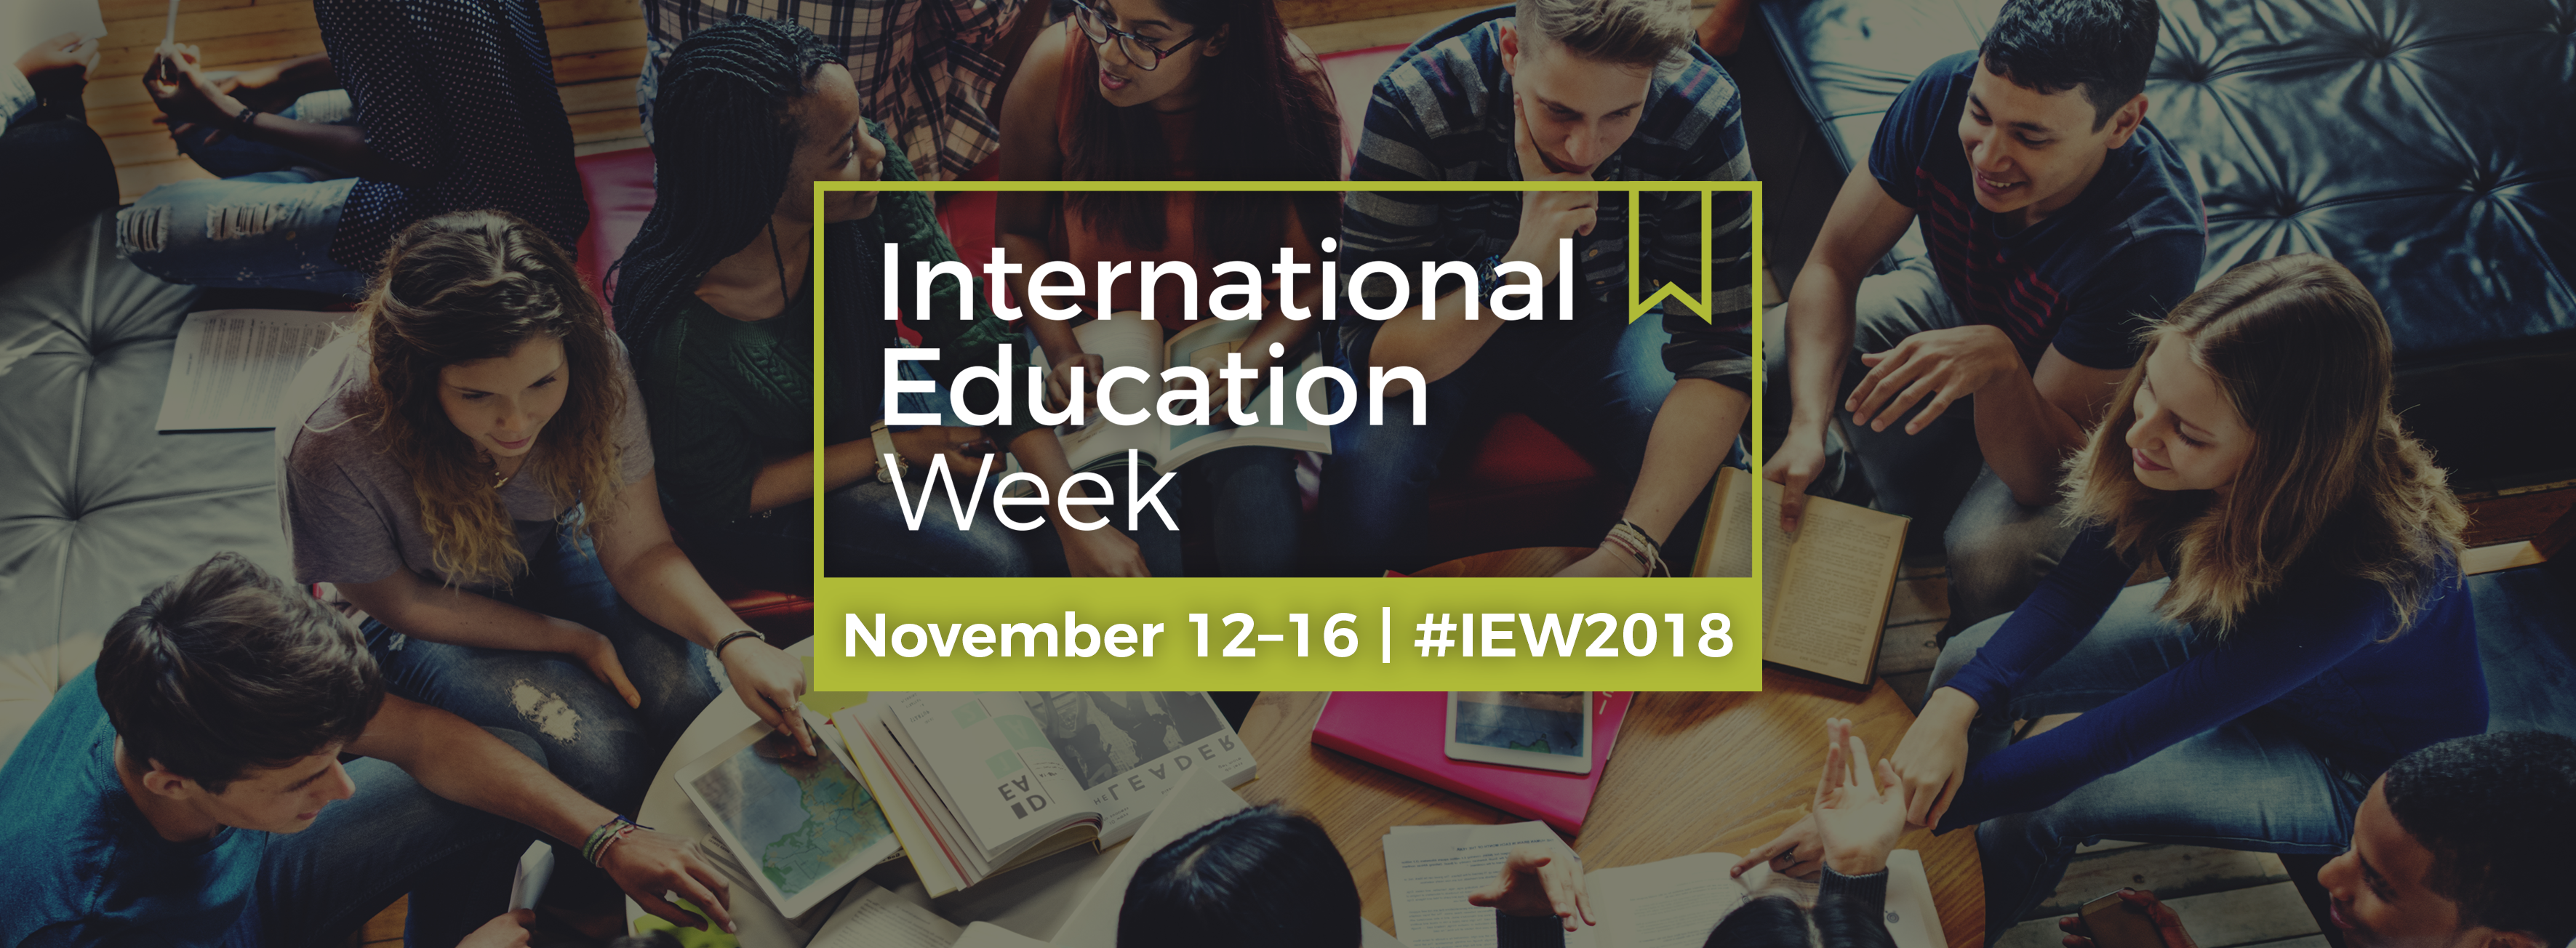 International Education Week (IEW) is a joint initiative of the U.S. Department of State and the U.S. Department of Education to promote programs that prepare Americans for a global environment.